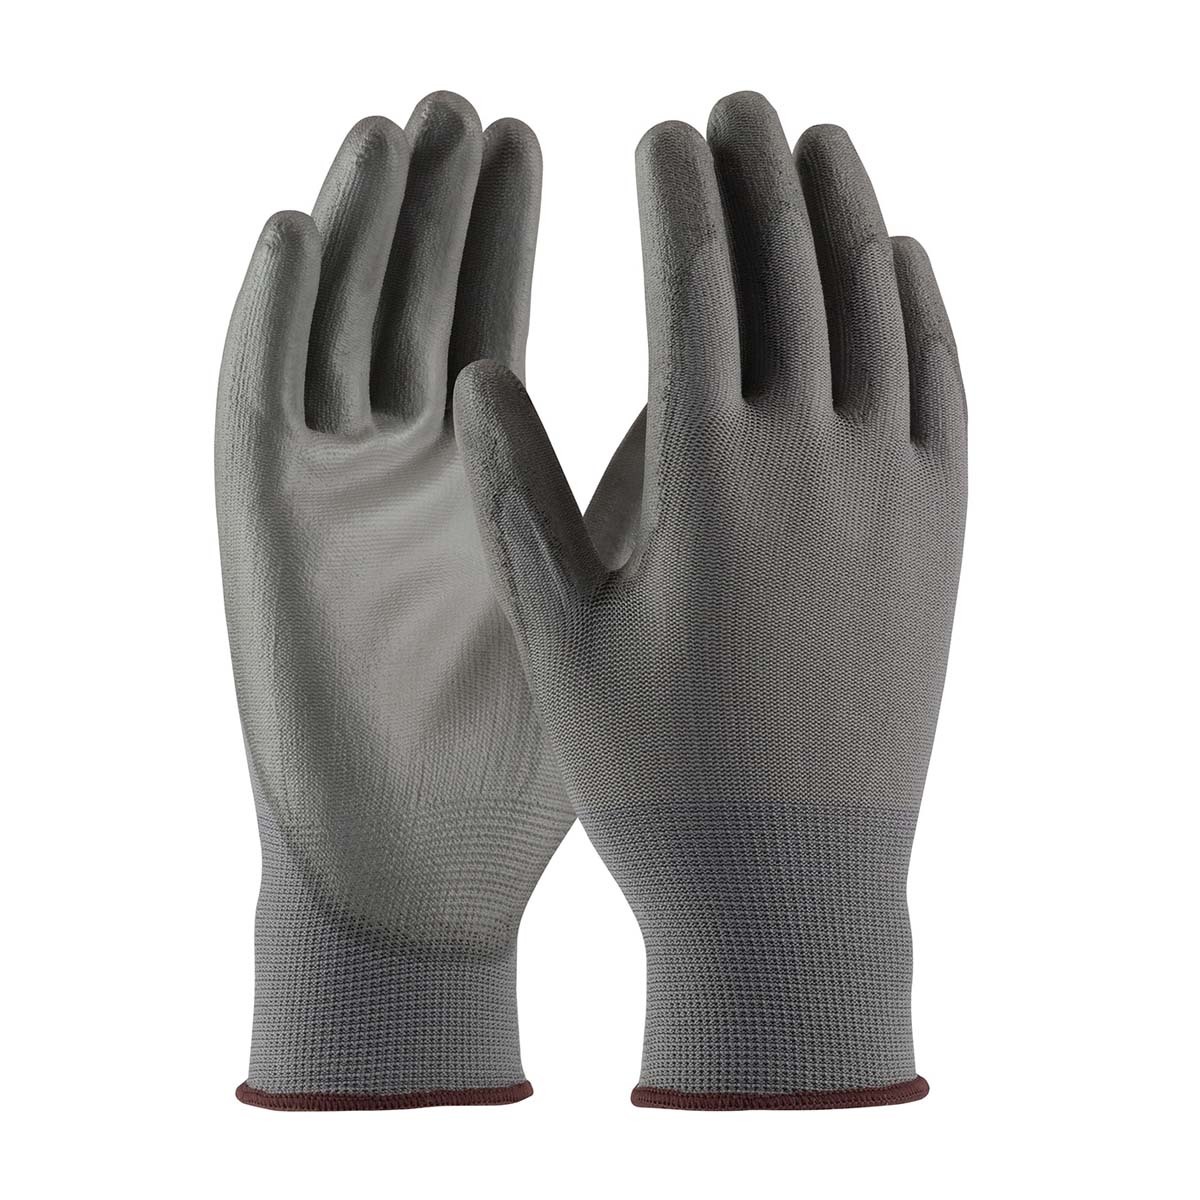 PIP® 13 Gauge Gray Nitrile Palm And Finger Coated Work Gloves With Polyester Liner And Continuous Knit Wrist